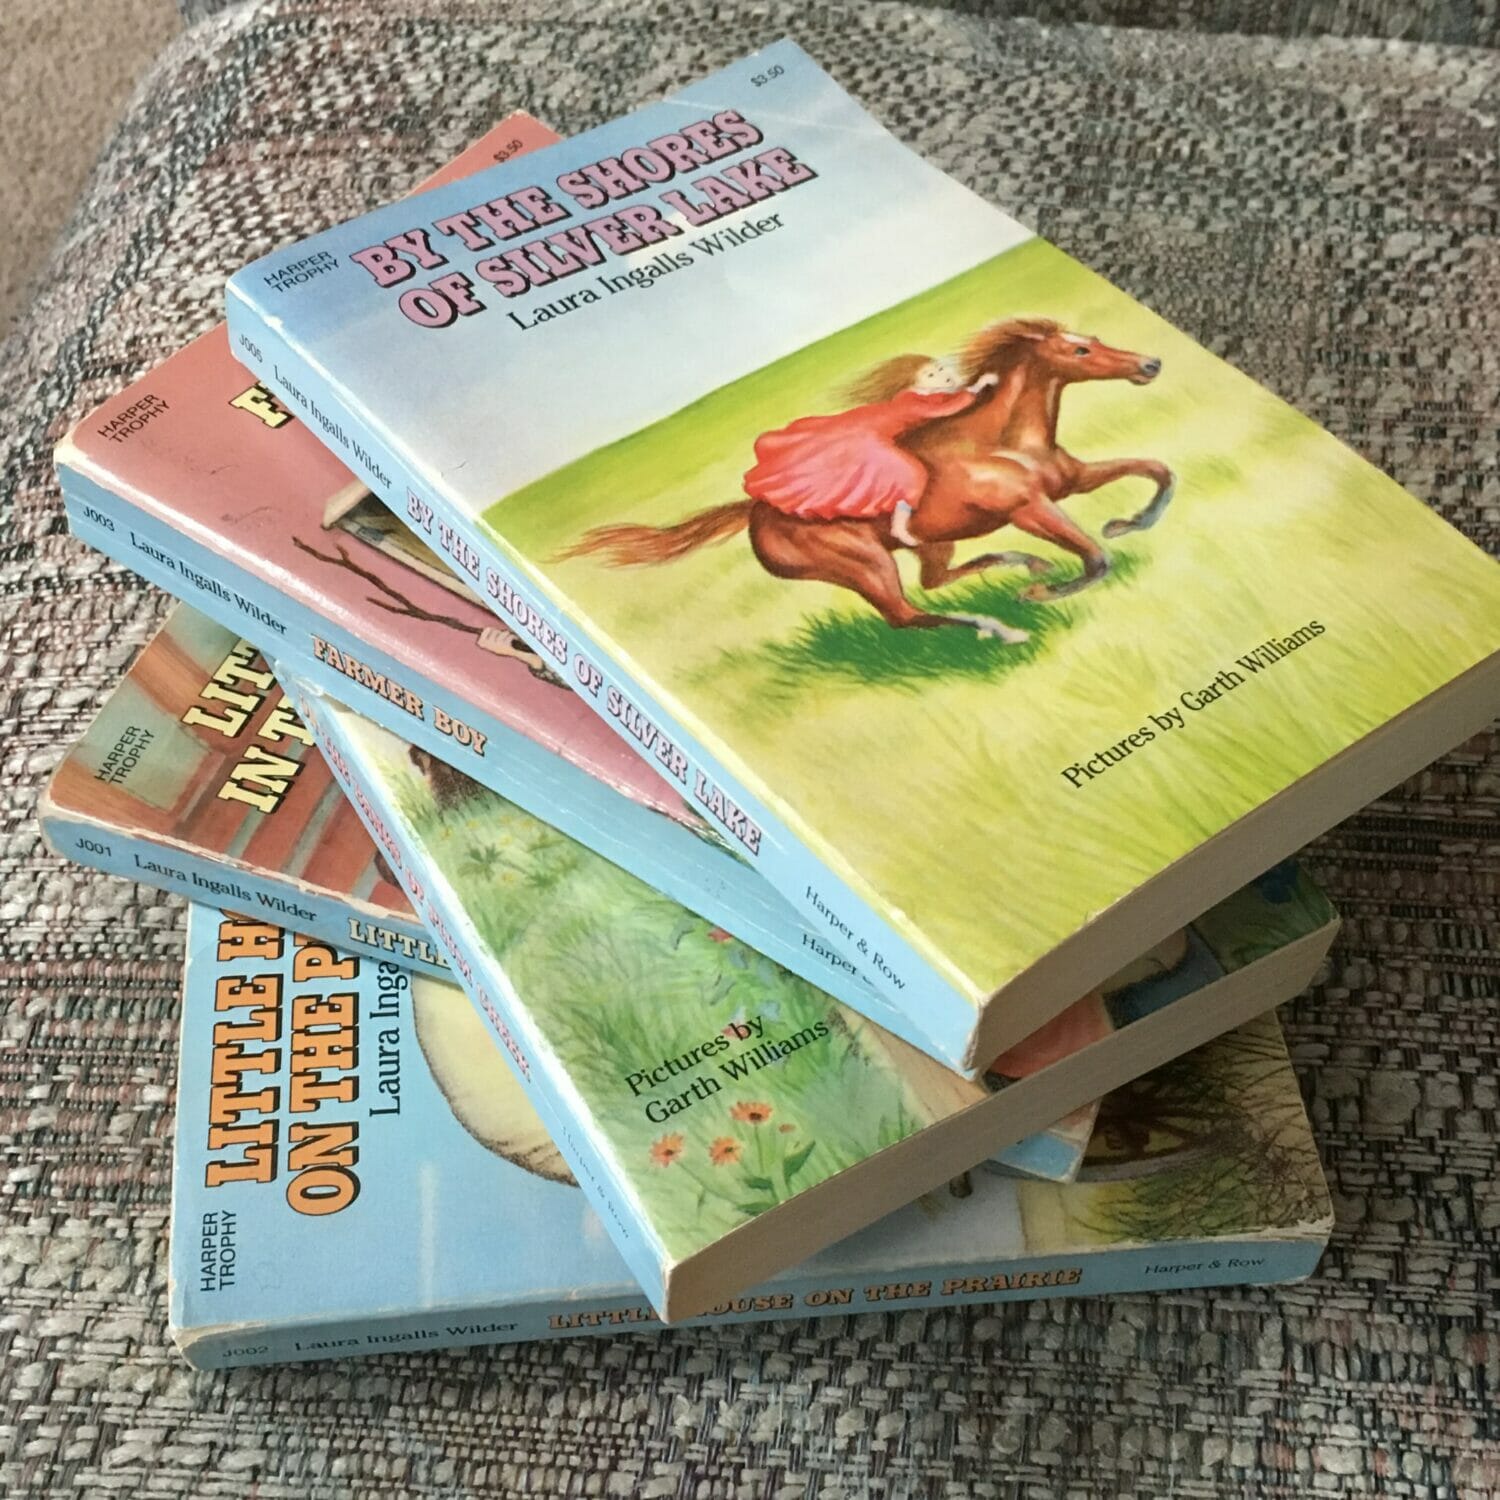 Have you read these classics with your kids yet? Here's what parents need to know BEFORE they read Little House on the Prairie books with their kids.